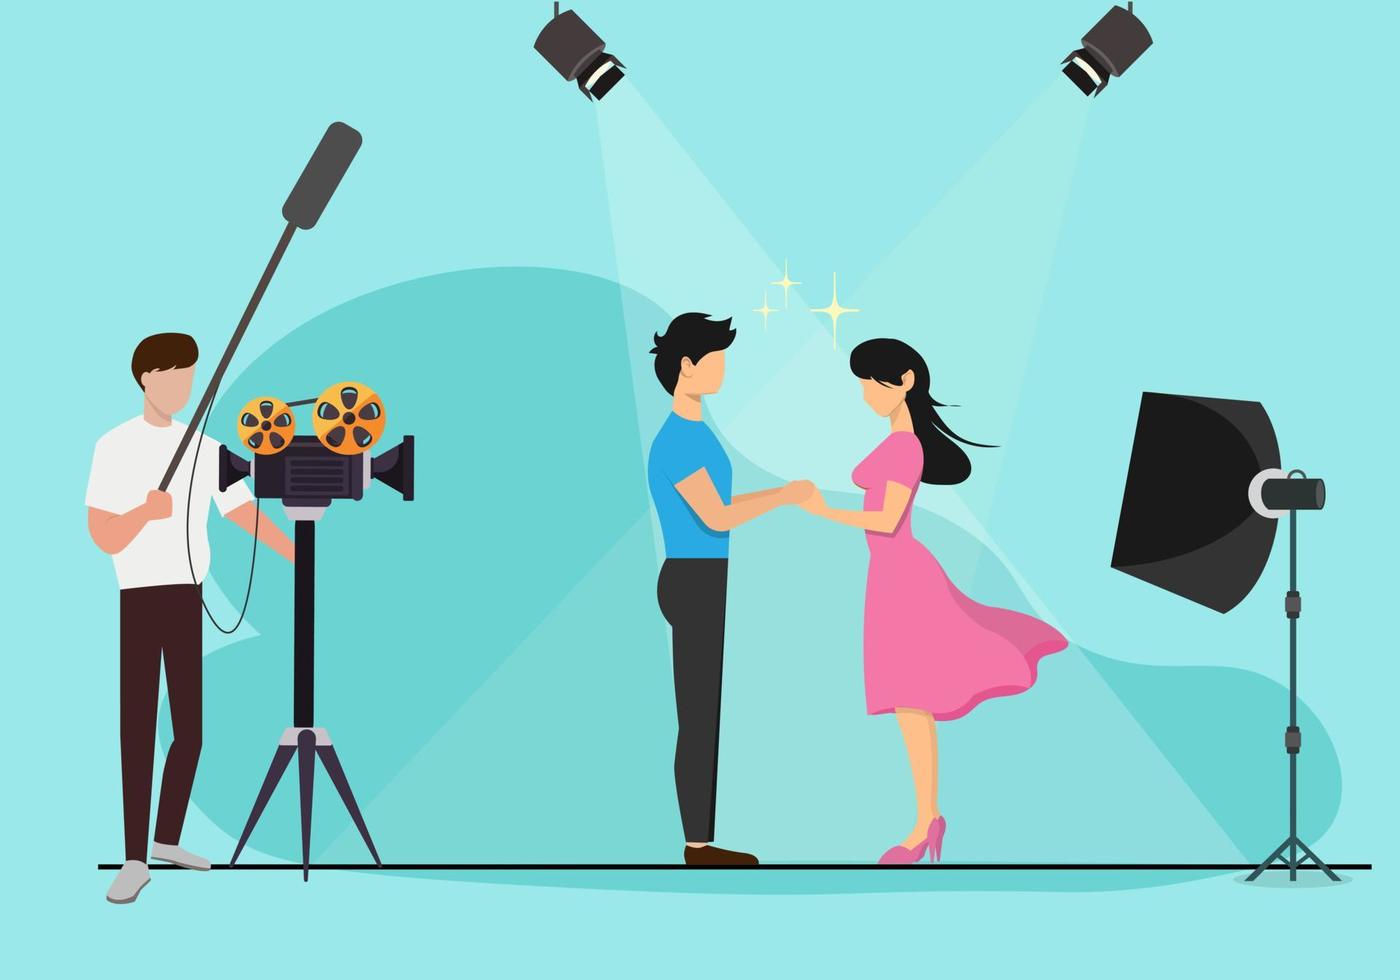 Love story movie production vector picture In a filming studio